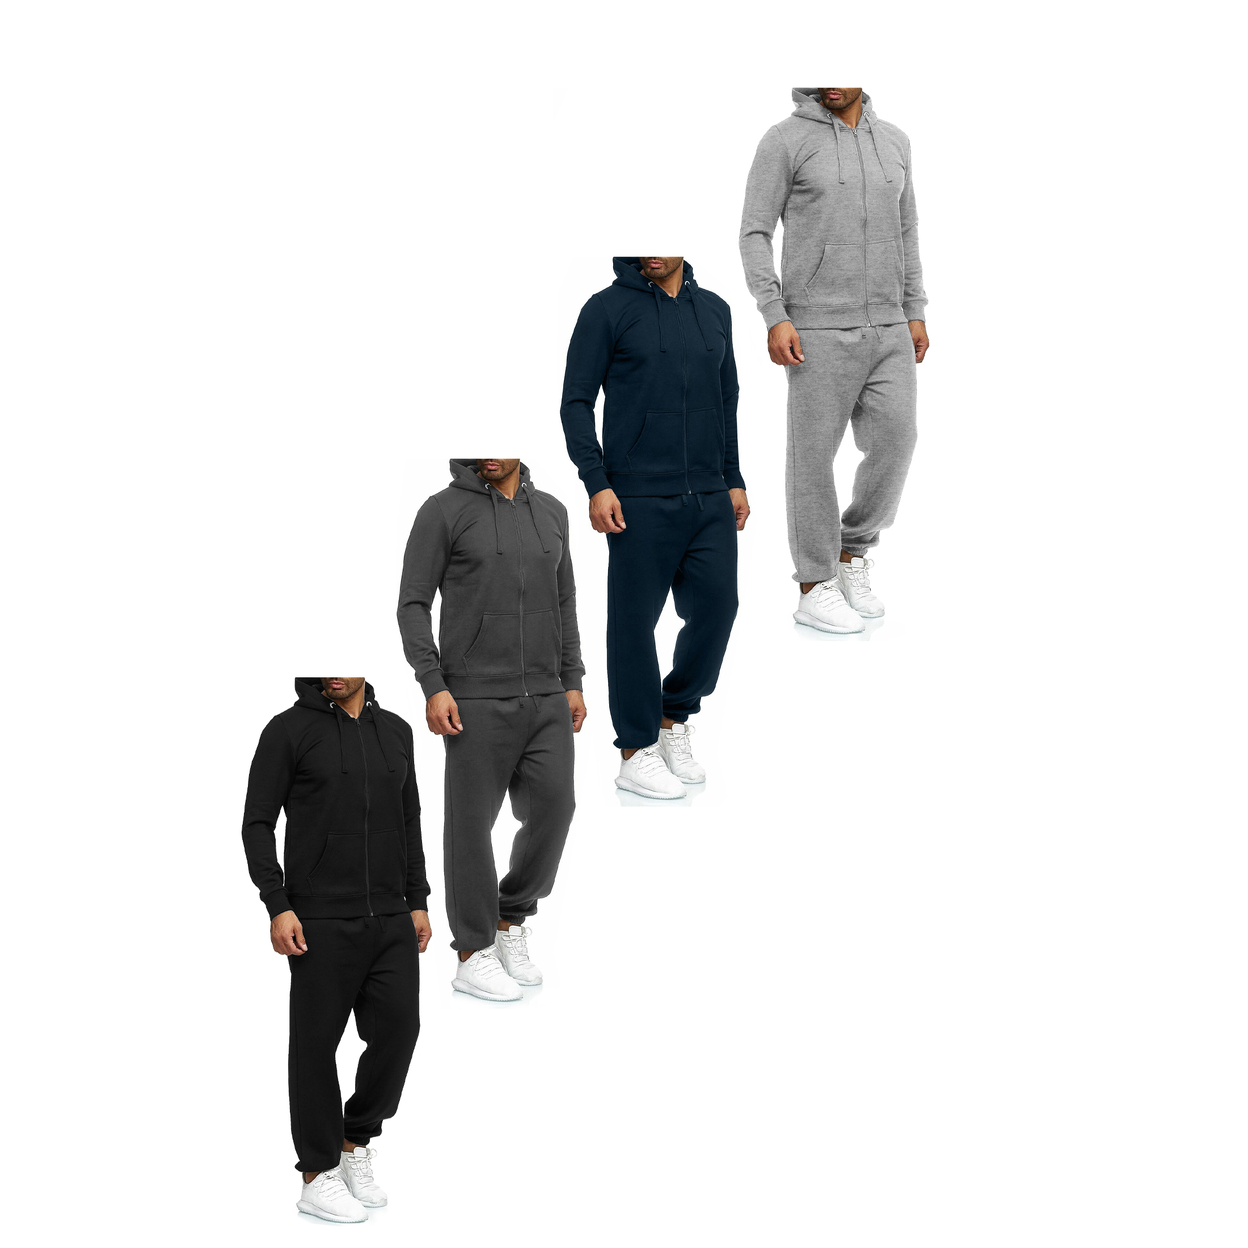 Multi-Pack: Men's Casual Big & Tall Athletic Active Winter Warm Fleece Lined Full Zip Tracksuit Jogger Set - Charcoal, 2-pack, Xx-large